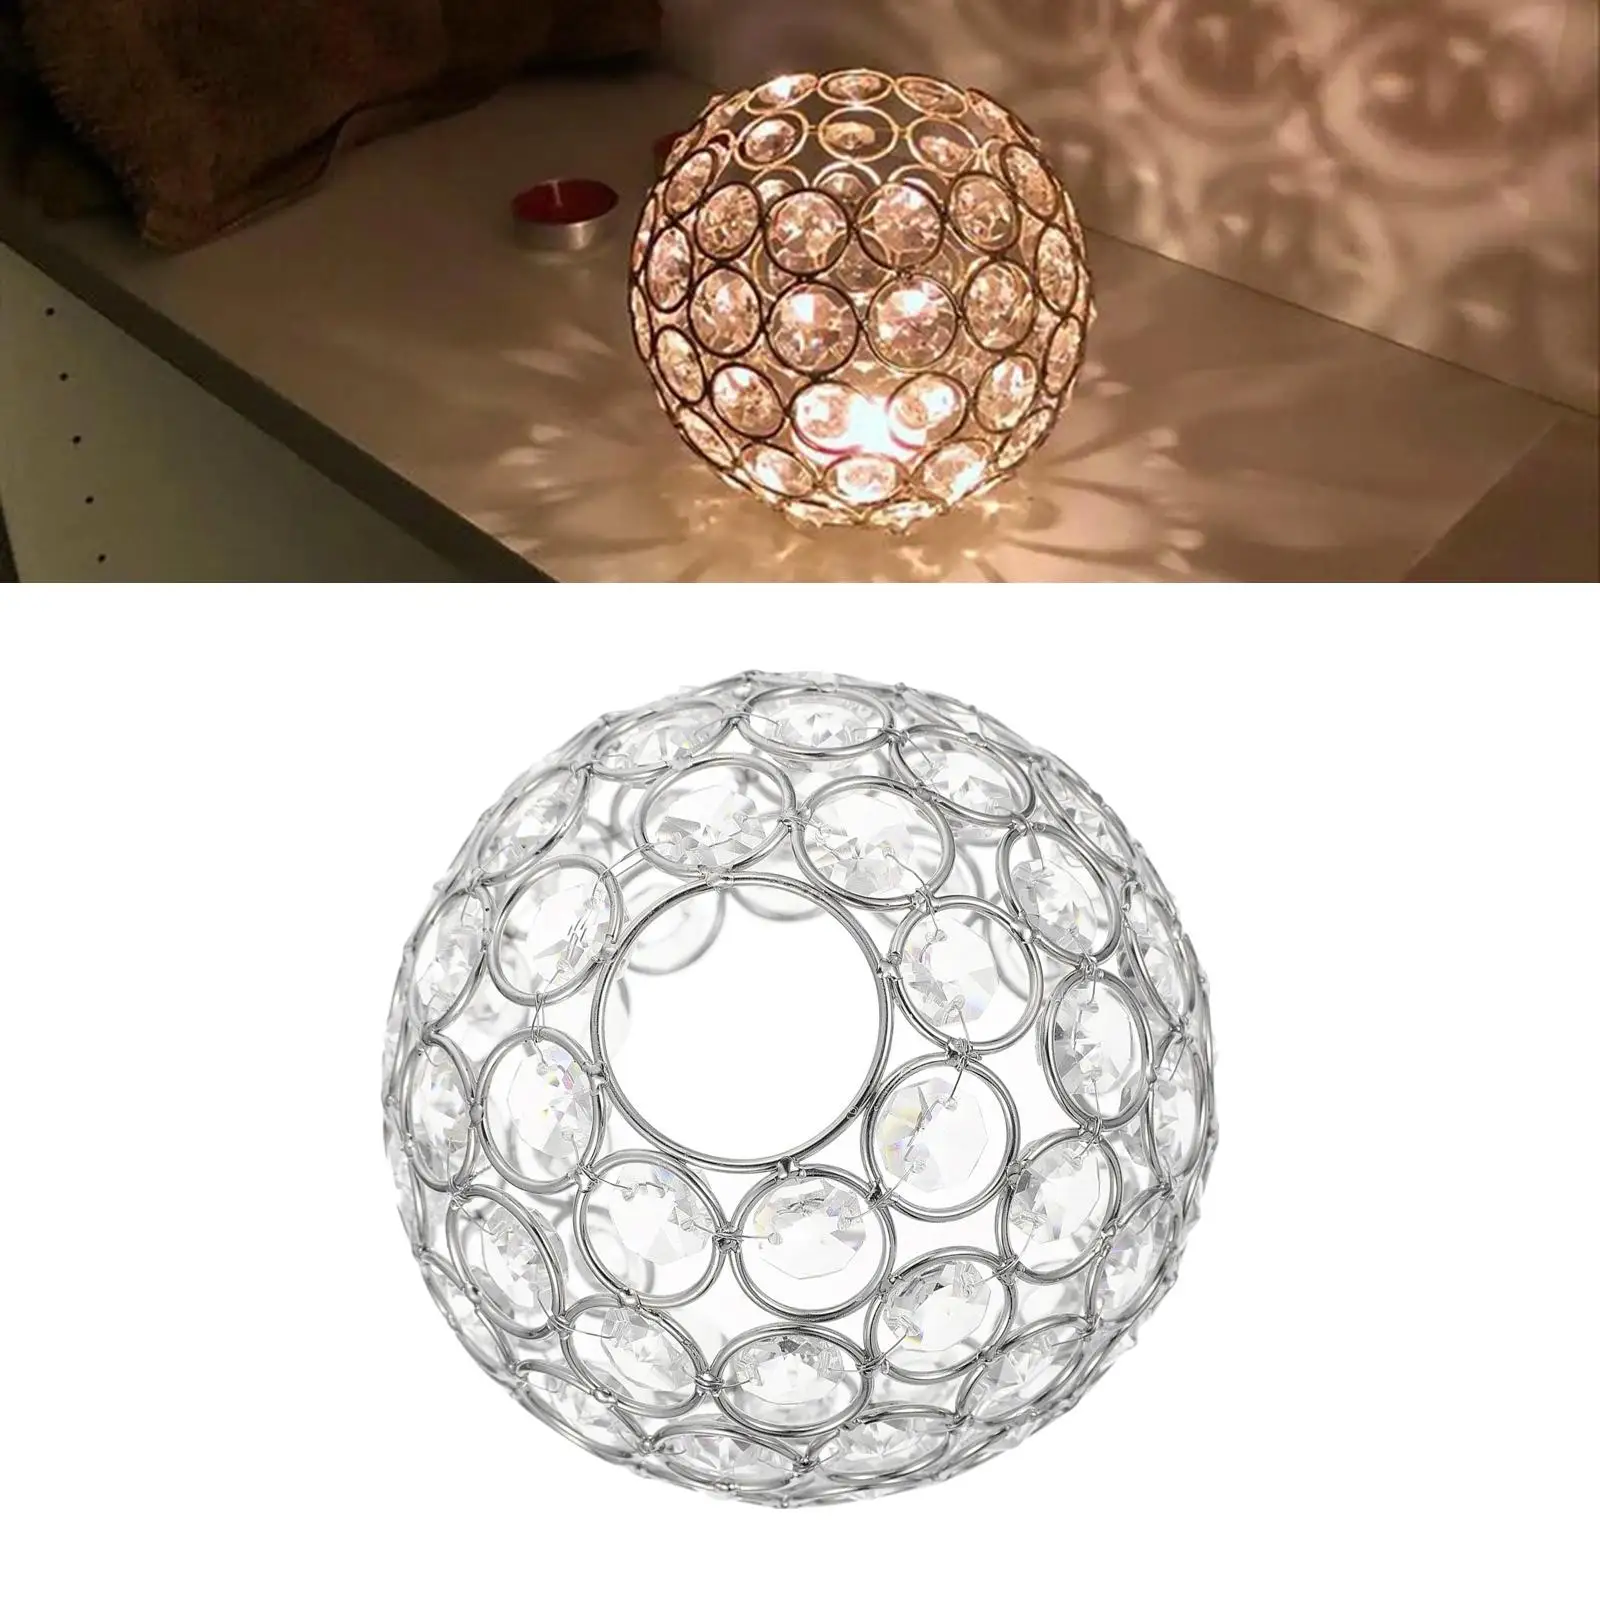 Classic Ceiling Light Shade Replacement Cover Rhinestone Lampshade Fitting Crystal Lampshade for Table Lamp Bedroom College Home